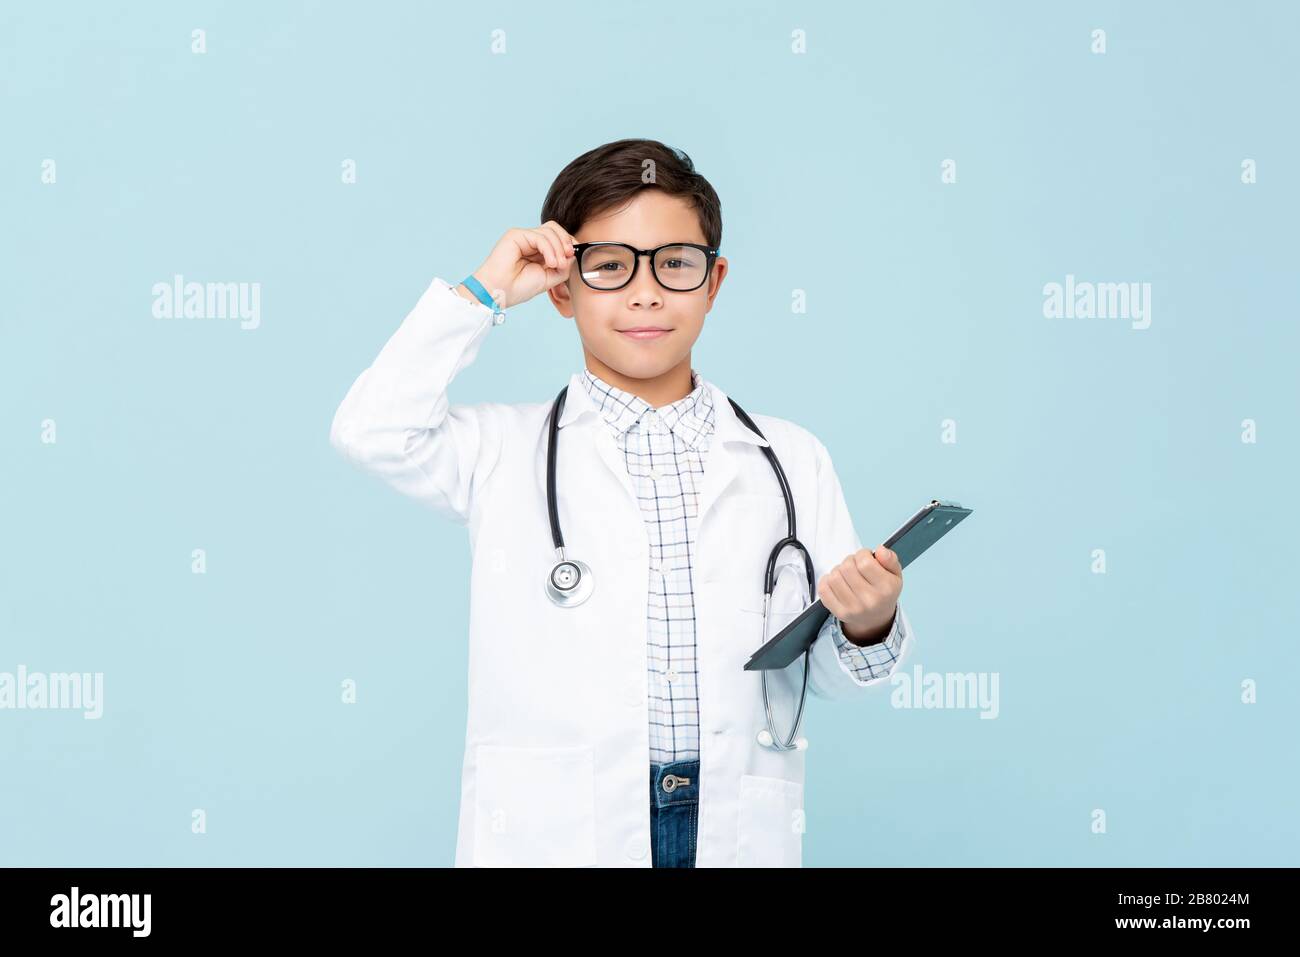 Smiling smart doctor boy with white medical coat and stethoscope isolated on light blue background Stock Photo